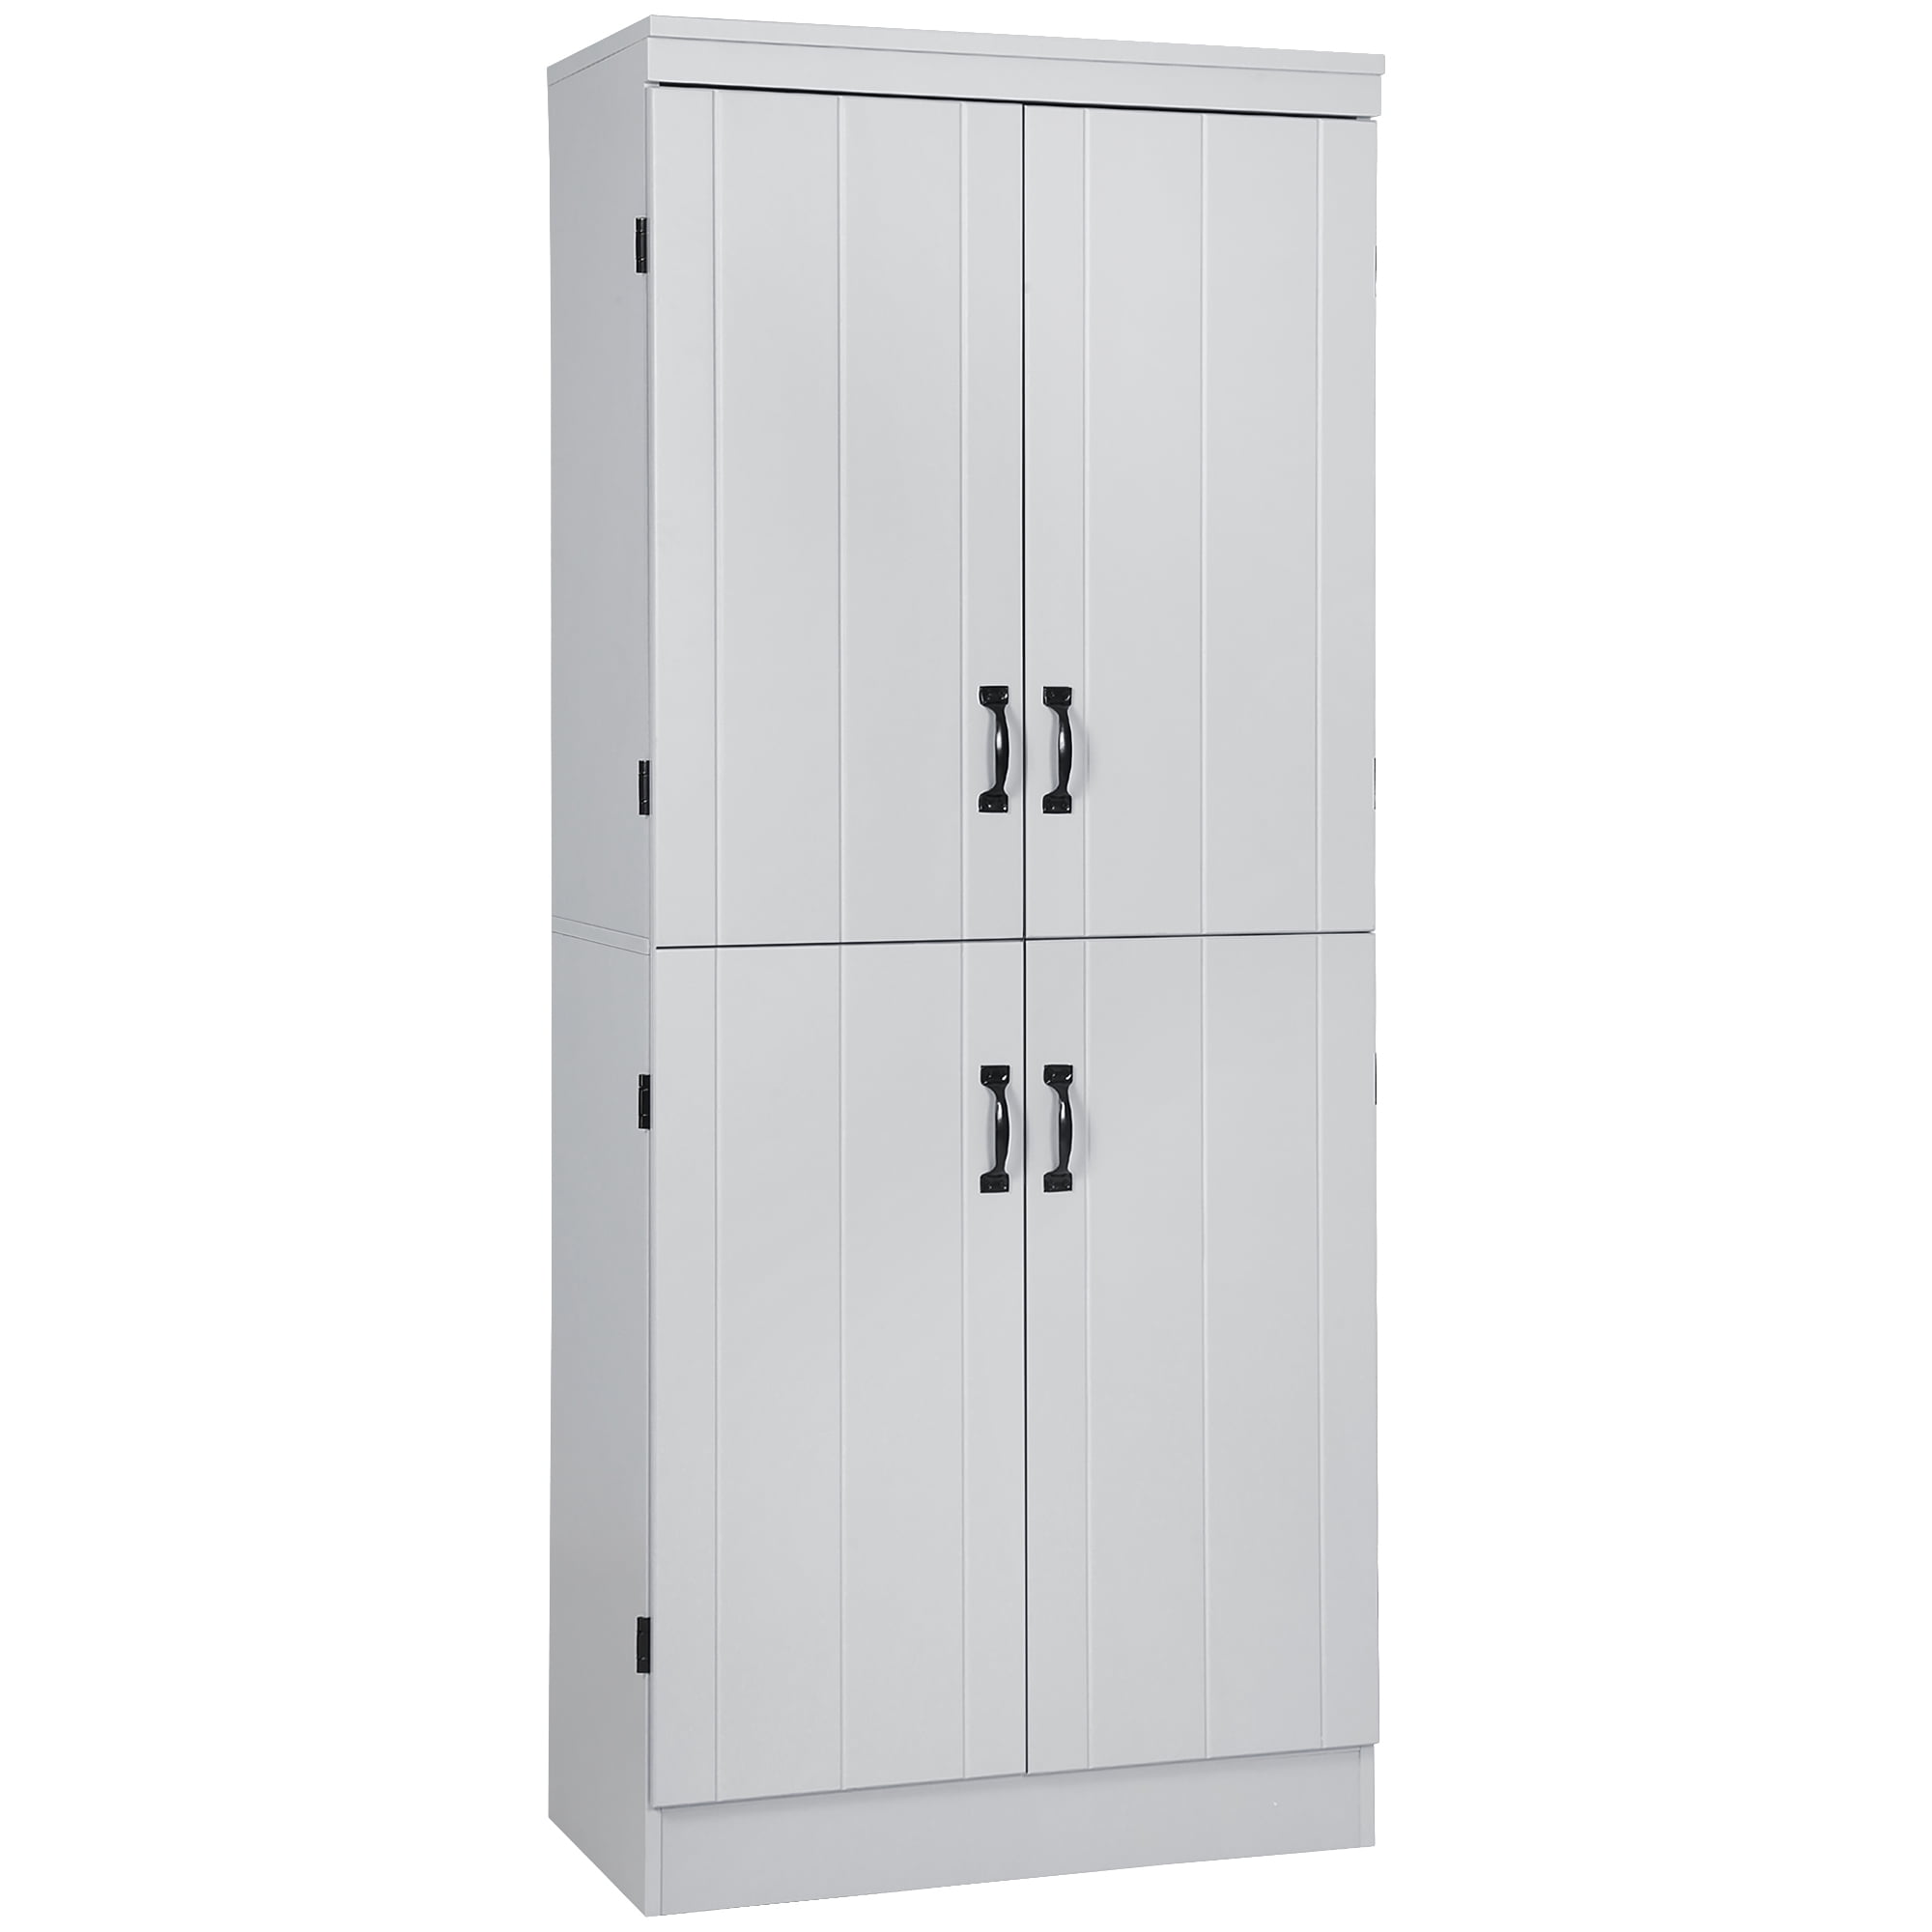 HOMCOM 52 Traditional Kitchen Pantry, Floor Storage Cabinet, Small Cupboard Organizer with Adjustable Shelves and 4-Doors for Dining Room, Gray